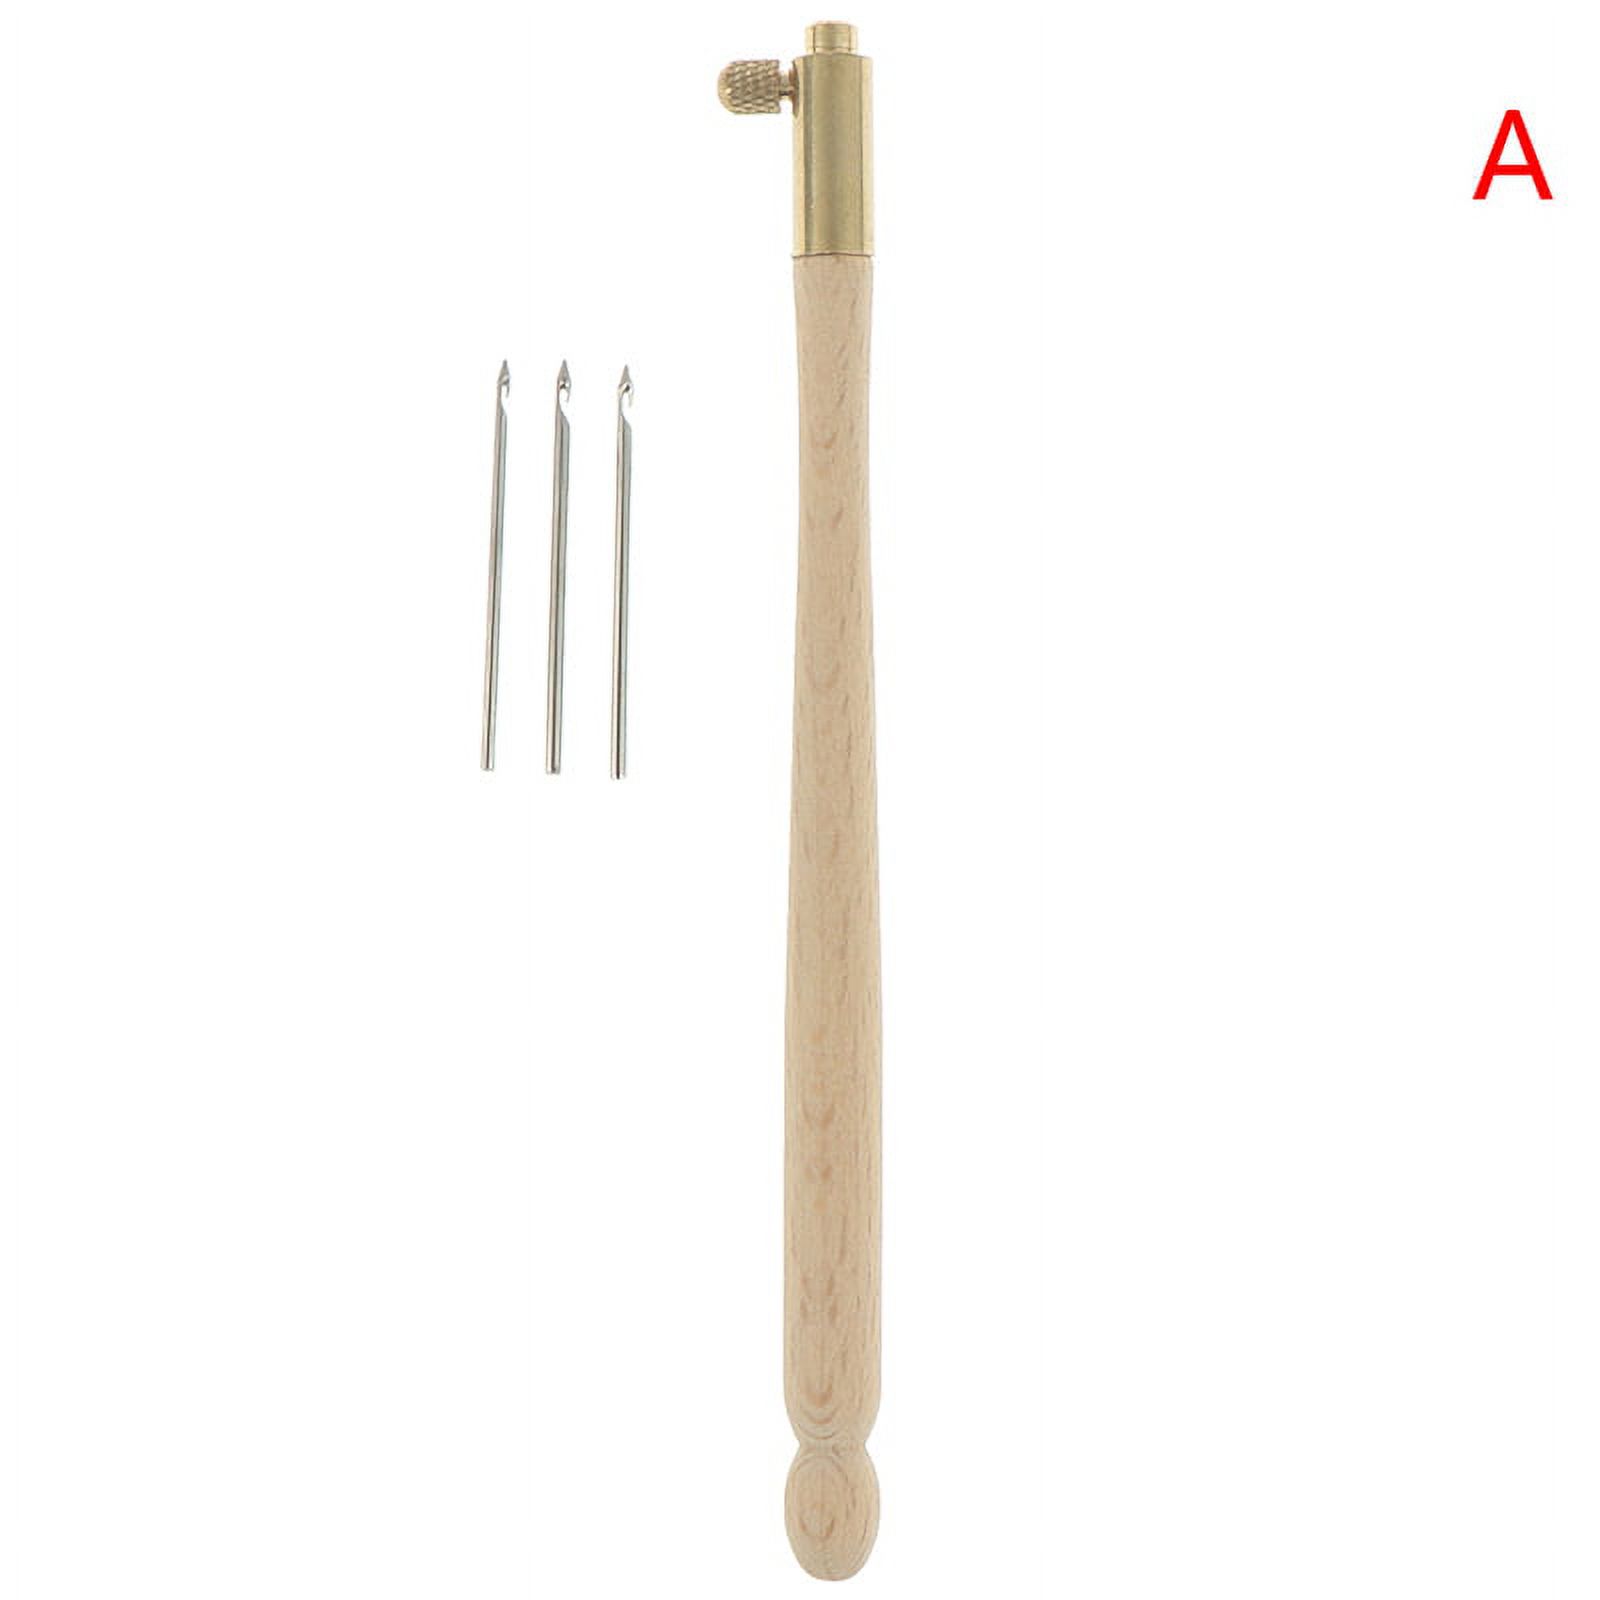 JETTINGBUY 1PC French Embroidery Needles Tambour Crochet Hook Luneville Hook with 3 Needles - image 1 of 7